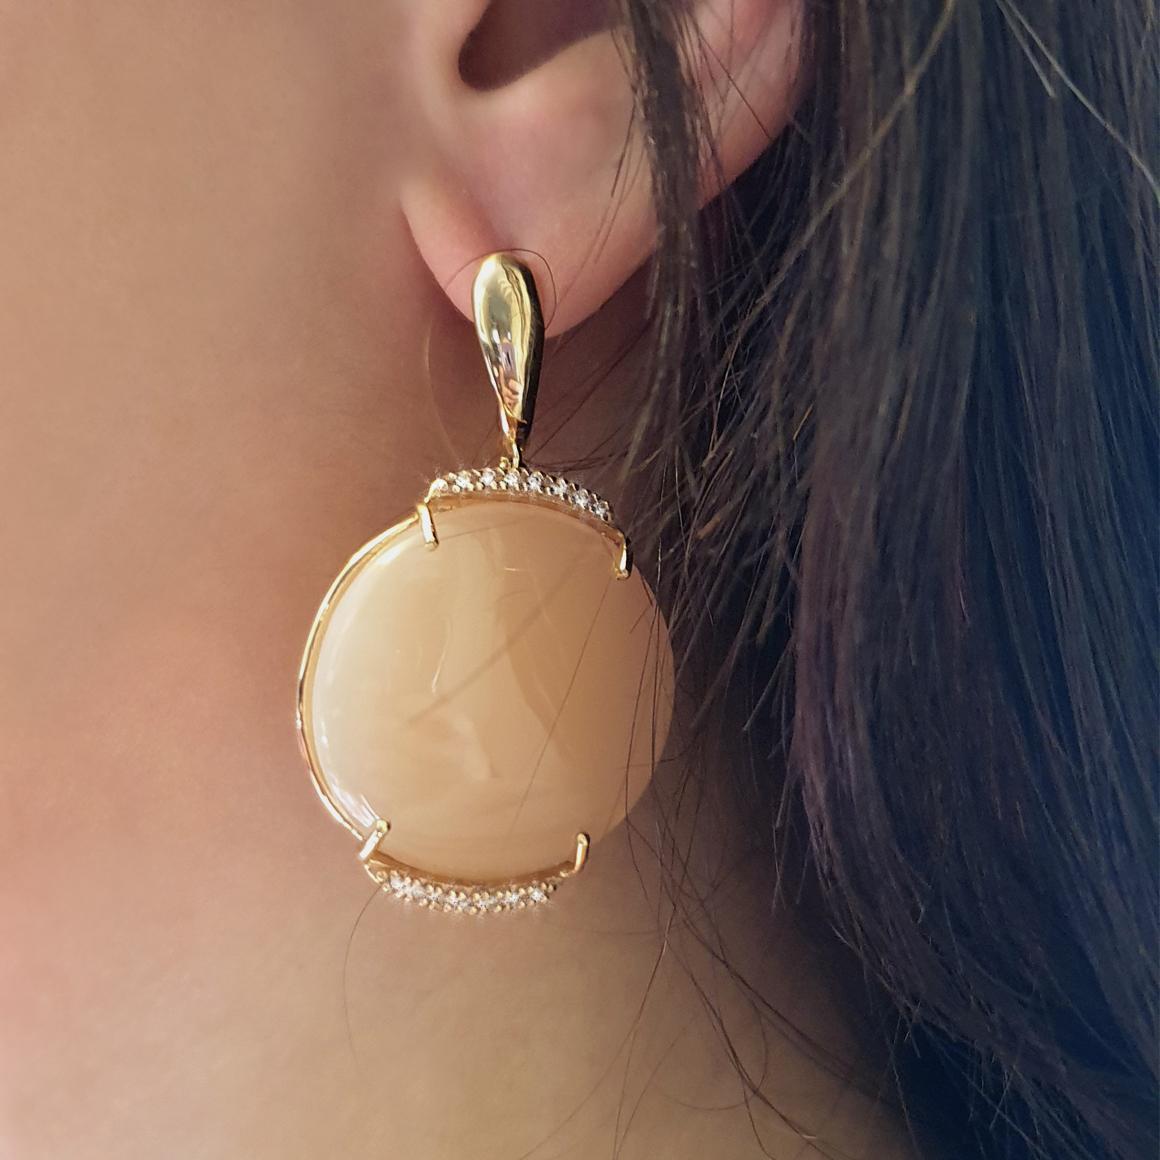 The Moonstone inspired by sweetness, a sensation of lightness and serenity.   Exquisitely refined and unforgettably tender is diffused in the air.  A Stanoppi Jewellery  piece is synonymous of elegance, refinement and exclusivity.
Earrings in 18k